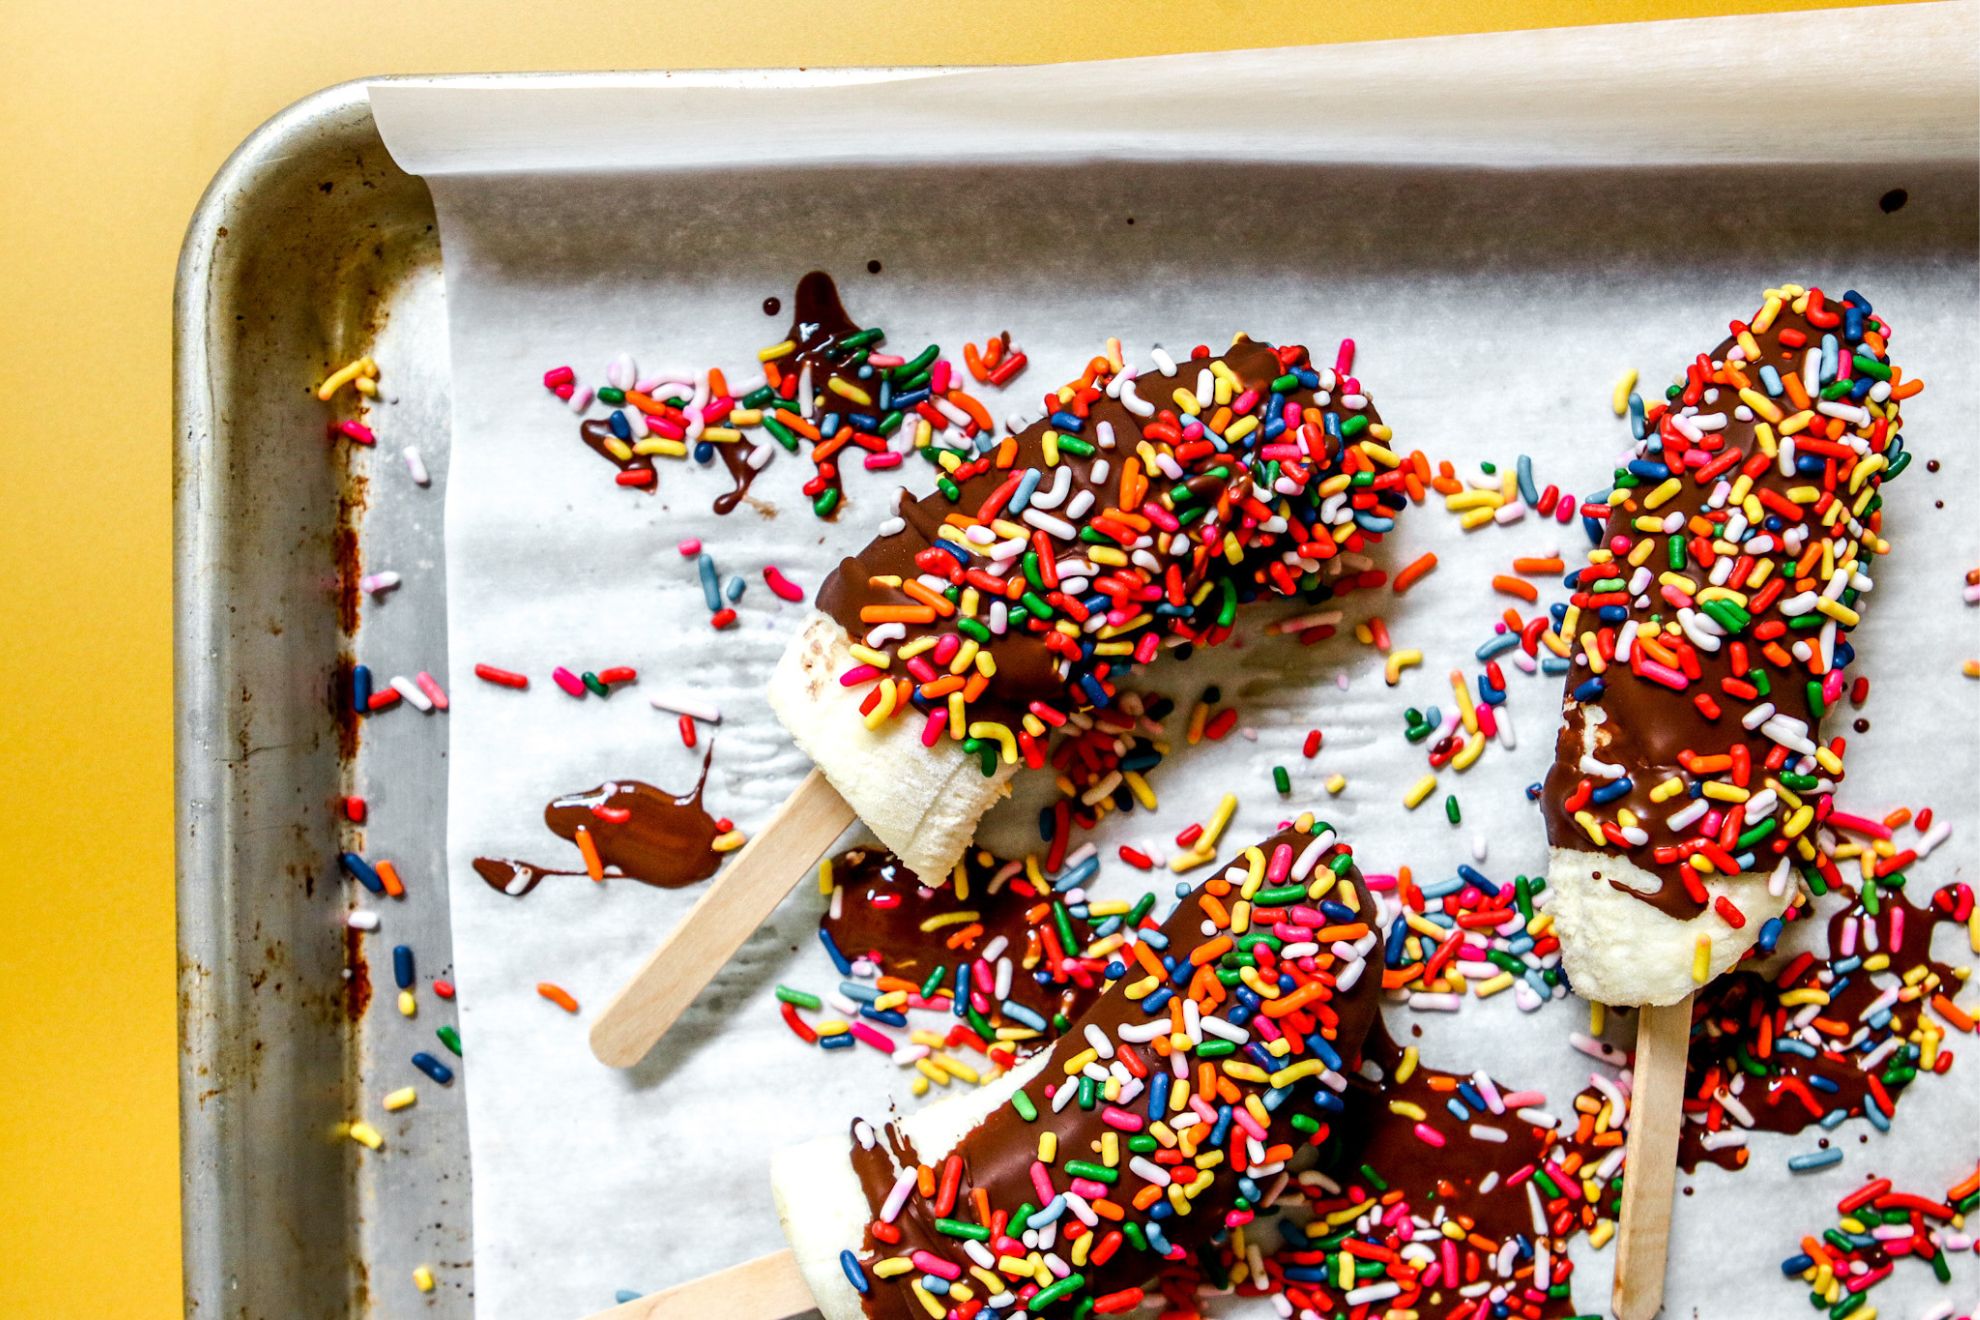 This is an overhead horizontal image of chocolate coated banana pops with rainbow sprinkles. The pops are on a white piece of parchment paper on a baking sheet with lots of melted chocolate and rainbow sprinkles scattered around them. The baking sheet sits on a yellow surface.